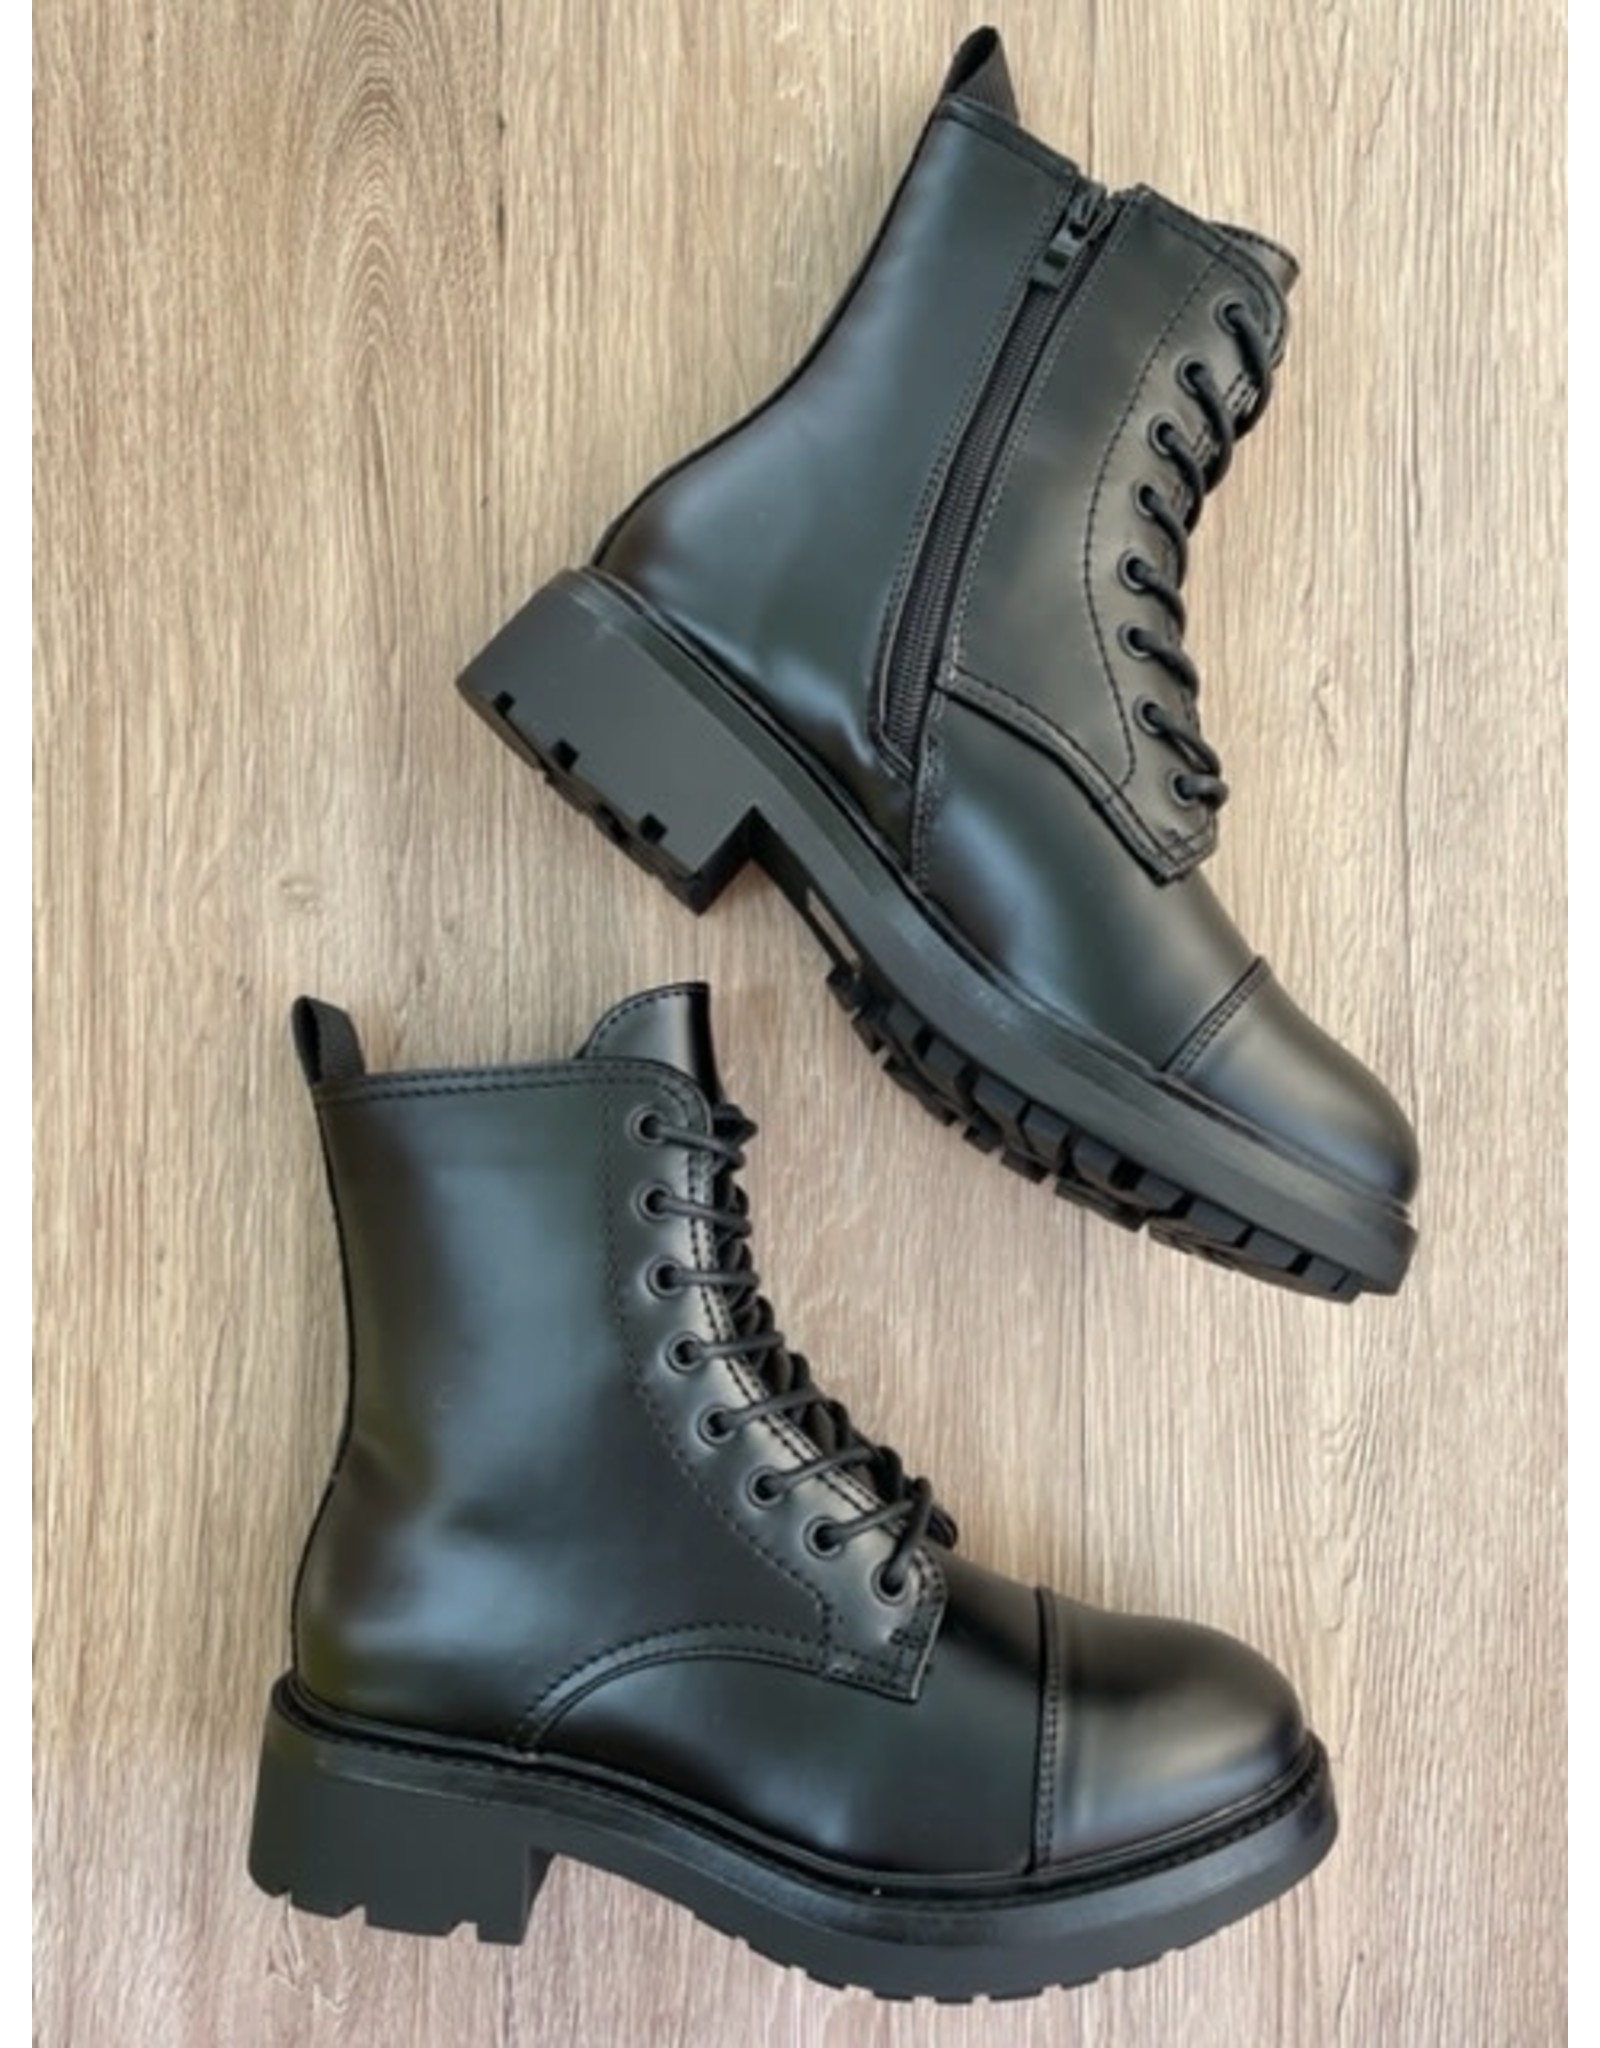 Taxi Taxi - Oslo 02T water resistant boot (black)